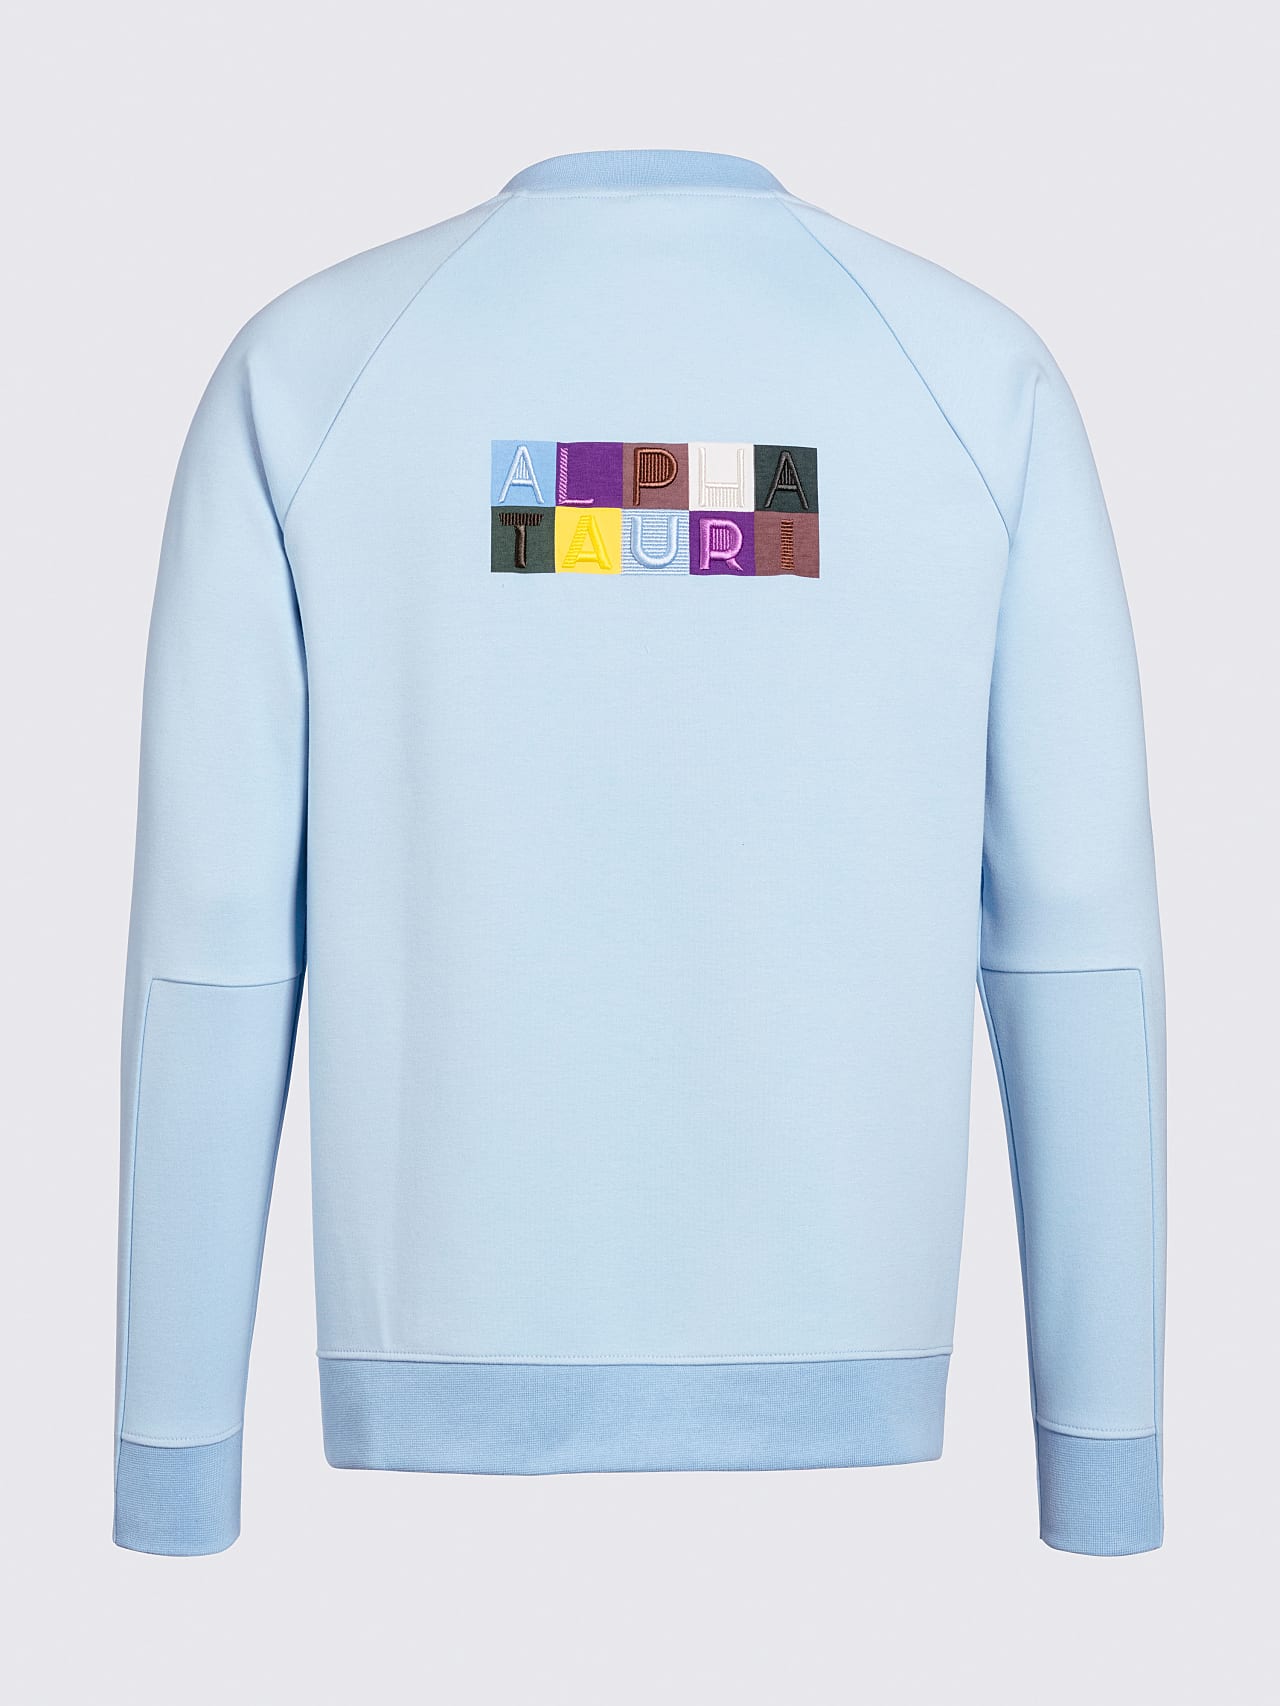 AlphaTauri | SEONE V1.Y6.01 | Sweat Jacket with Logo Embroidery in light blue for Men